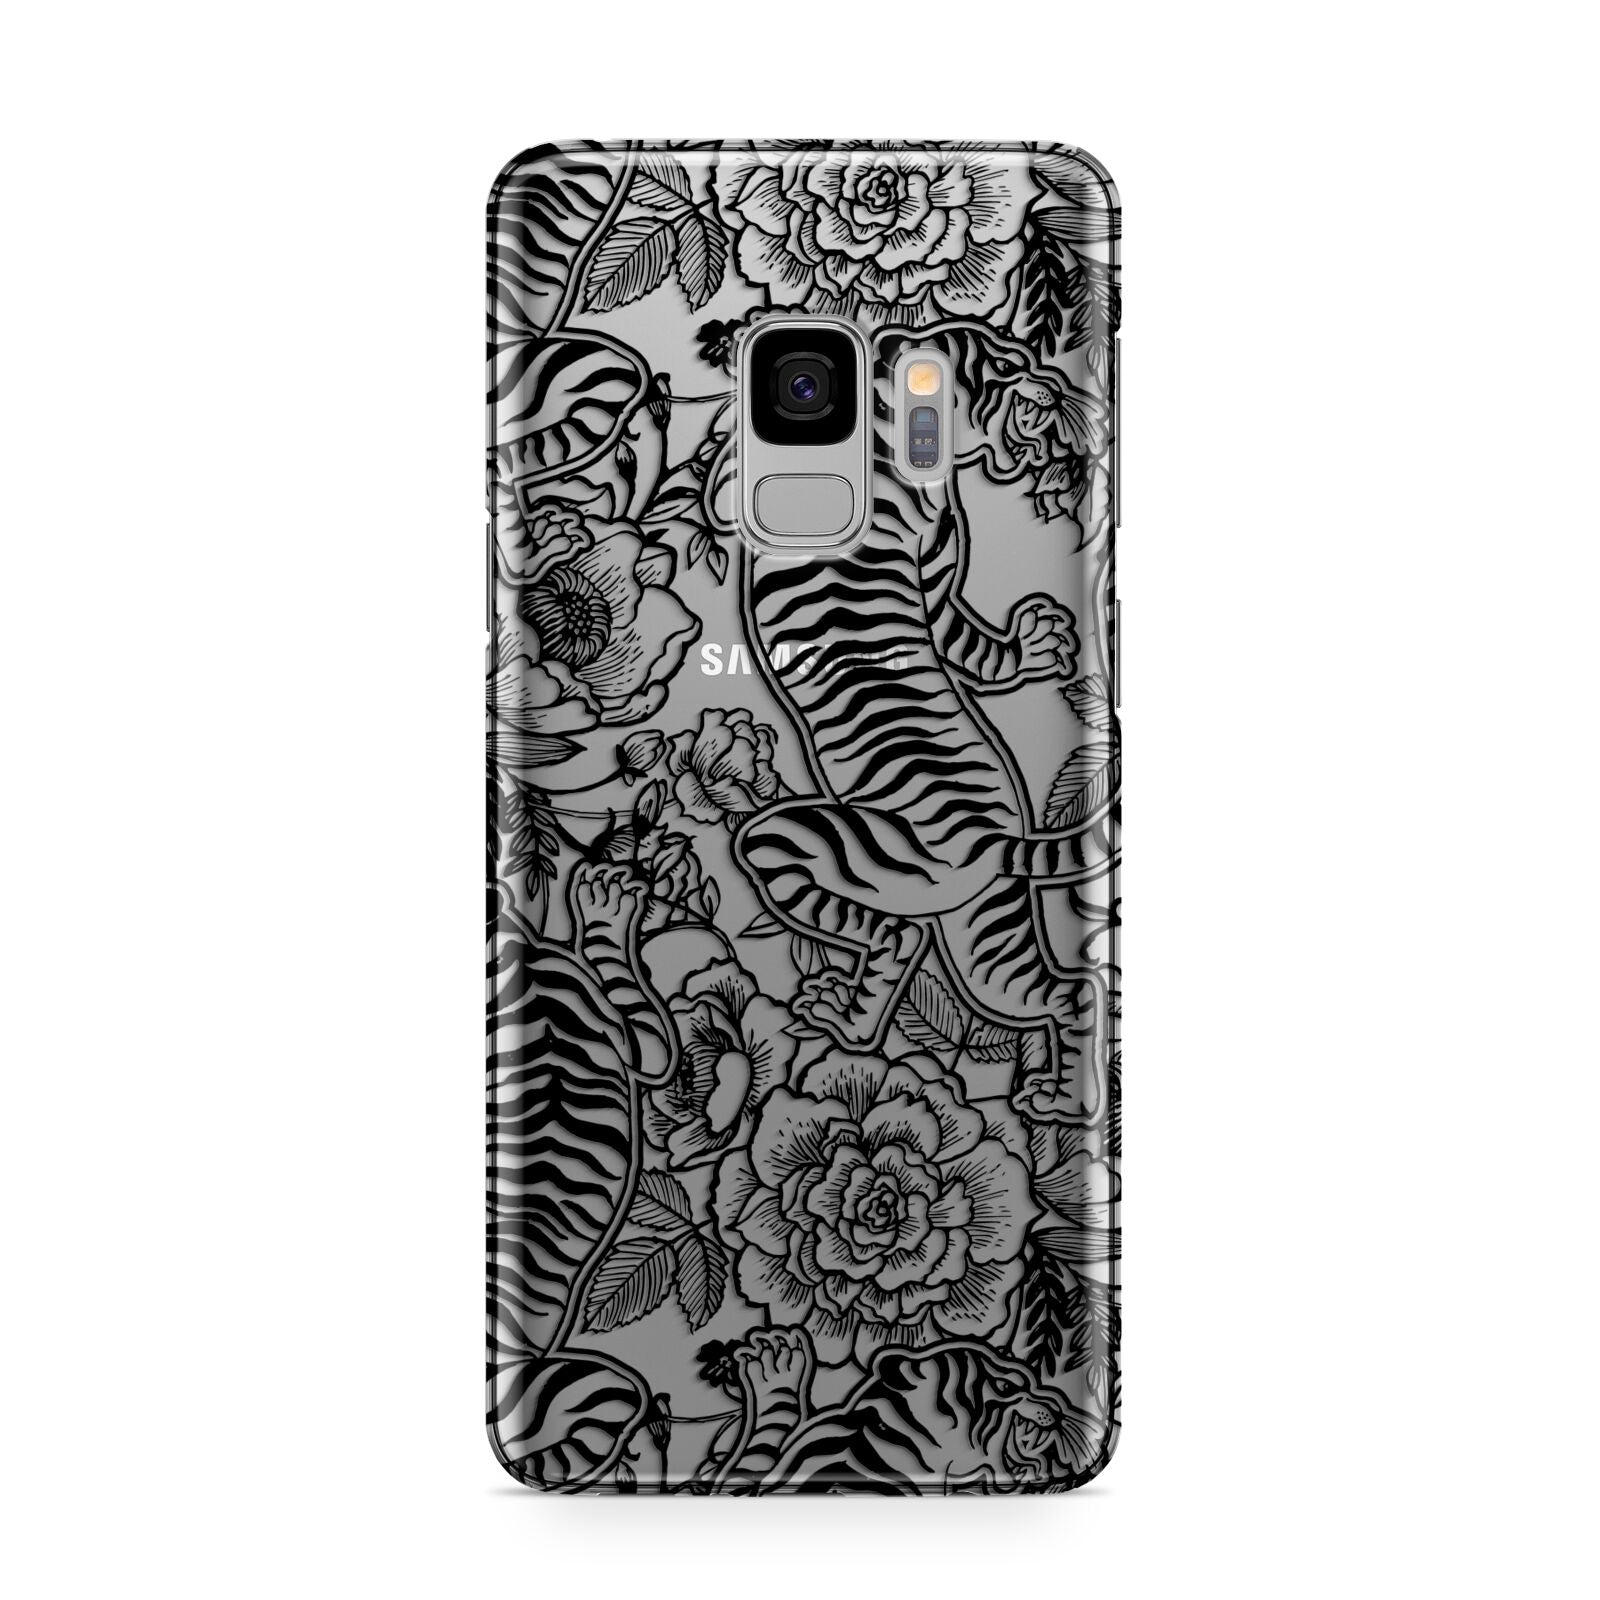 Chinese Tiger Samsung Galaxy S9 Case